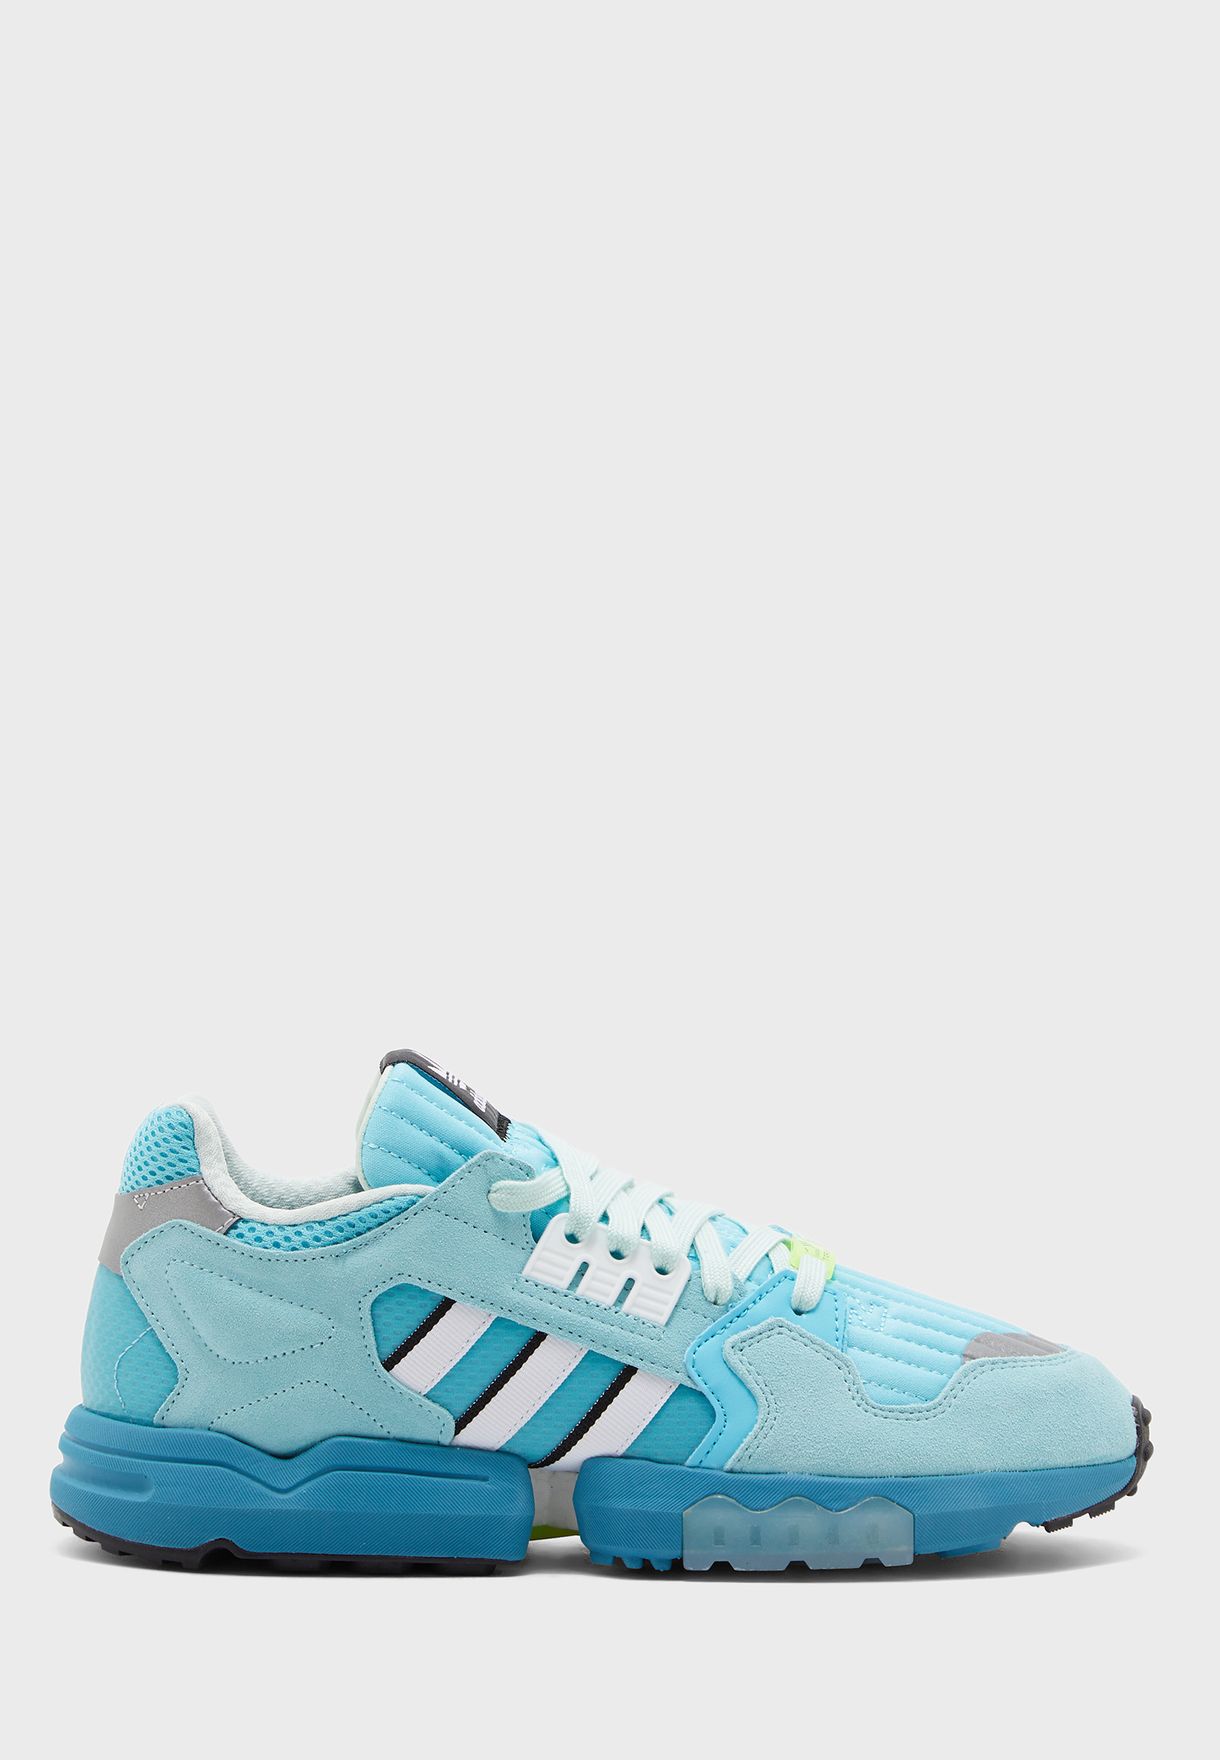 adidas originals zx torsion trainers in white and blue